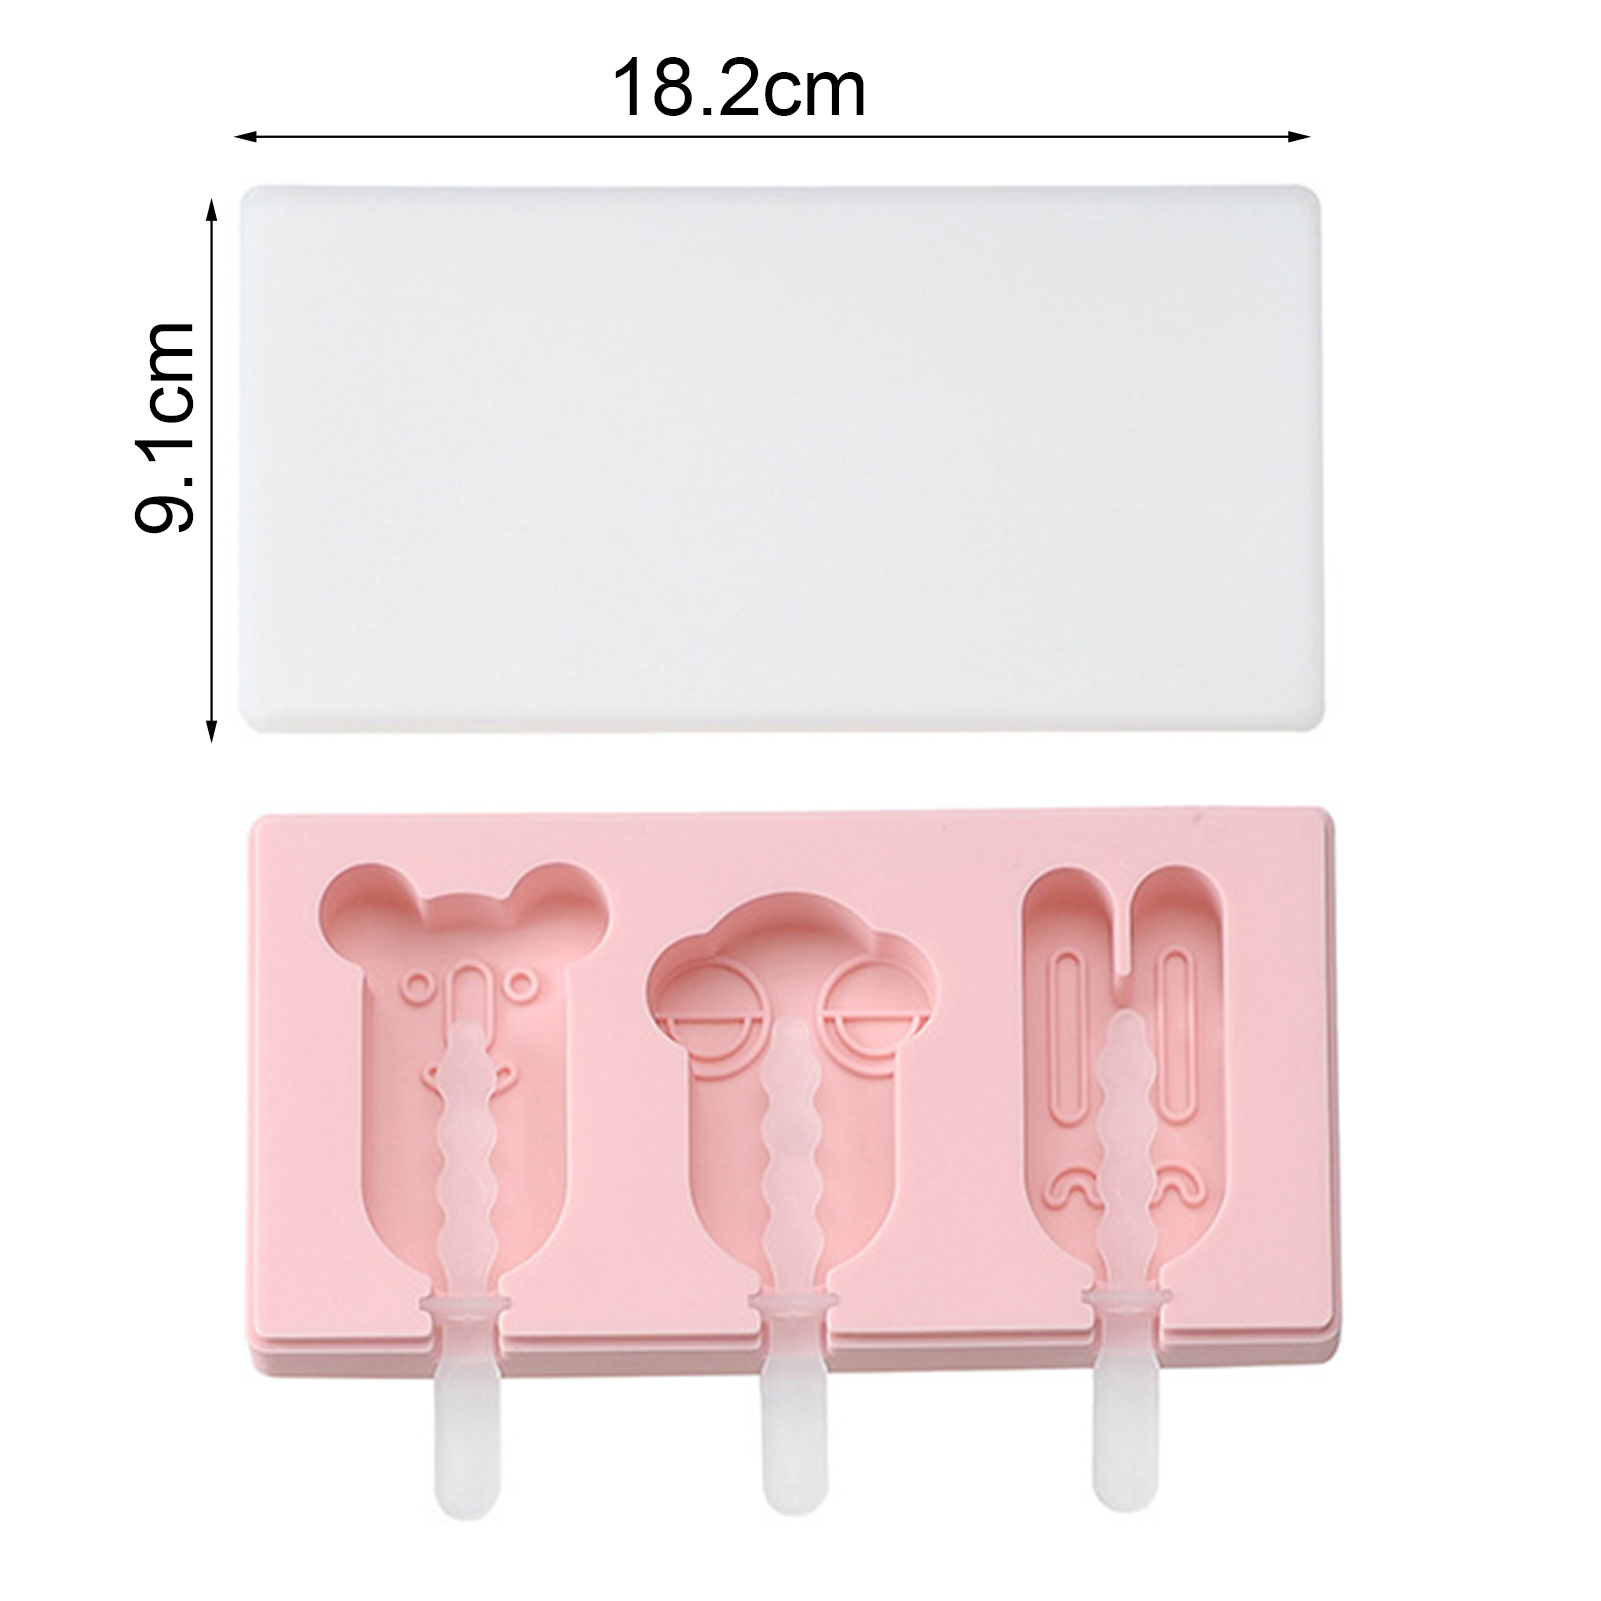 Zollyss 3 Cavities Silicone Popsicle Molds with Lid, BPA Free